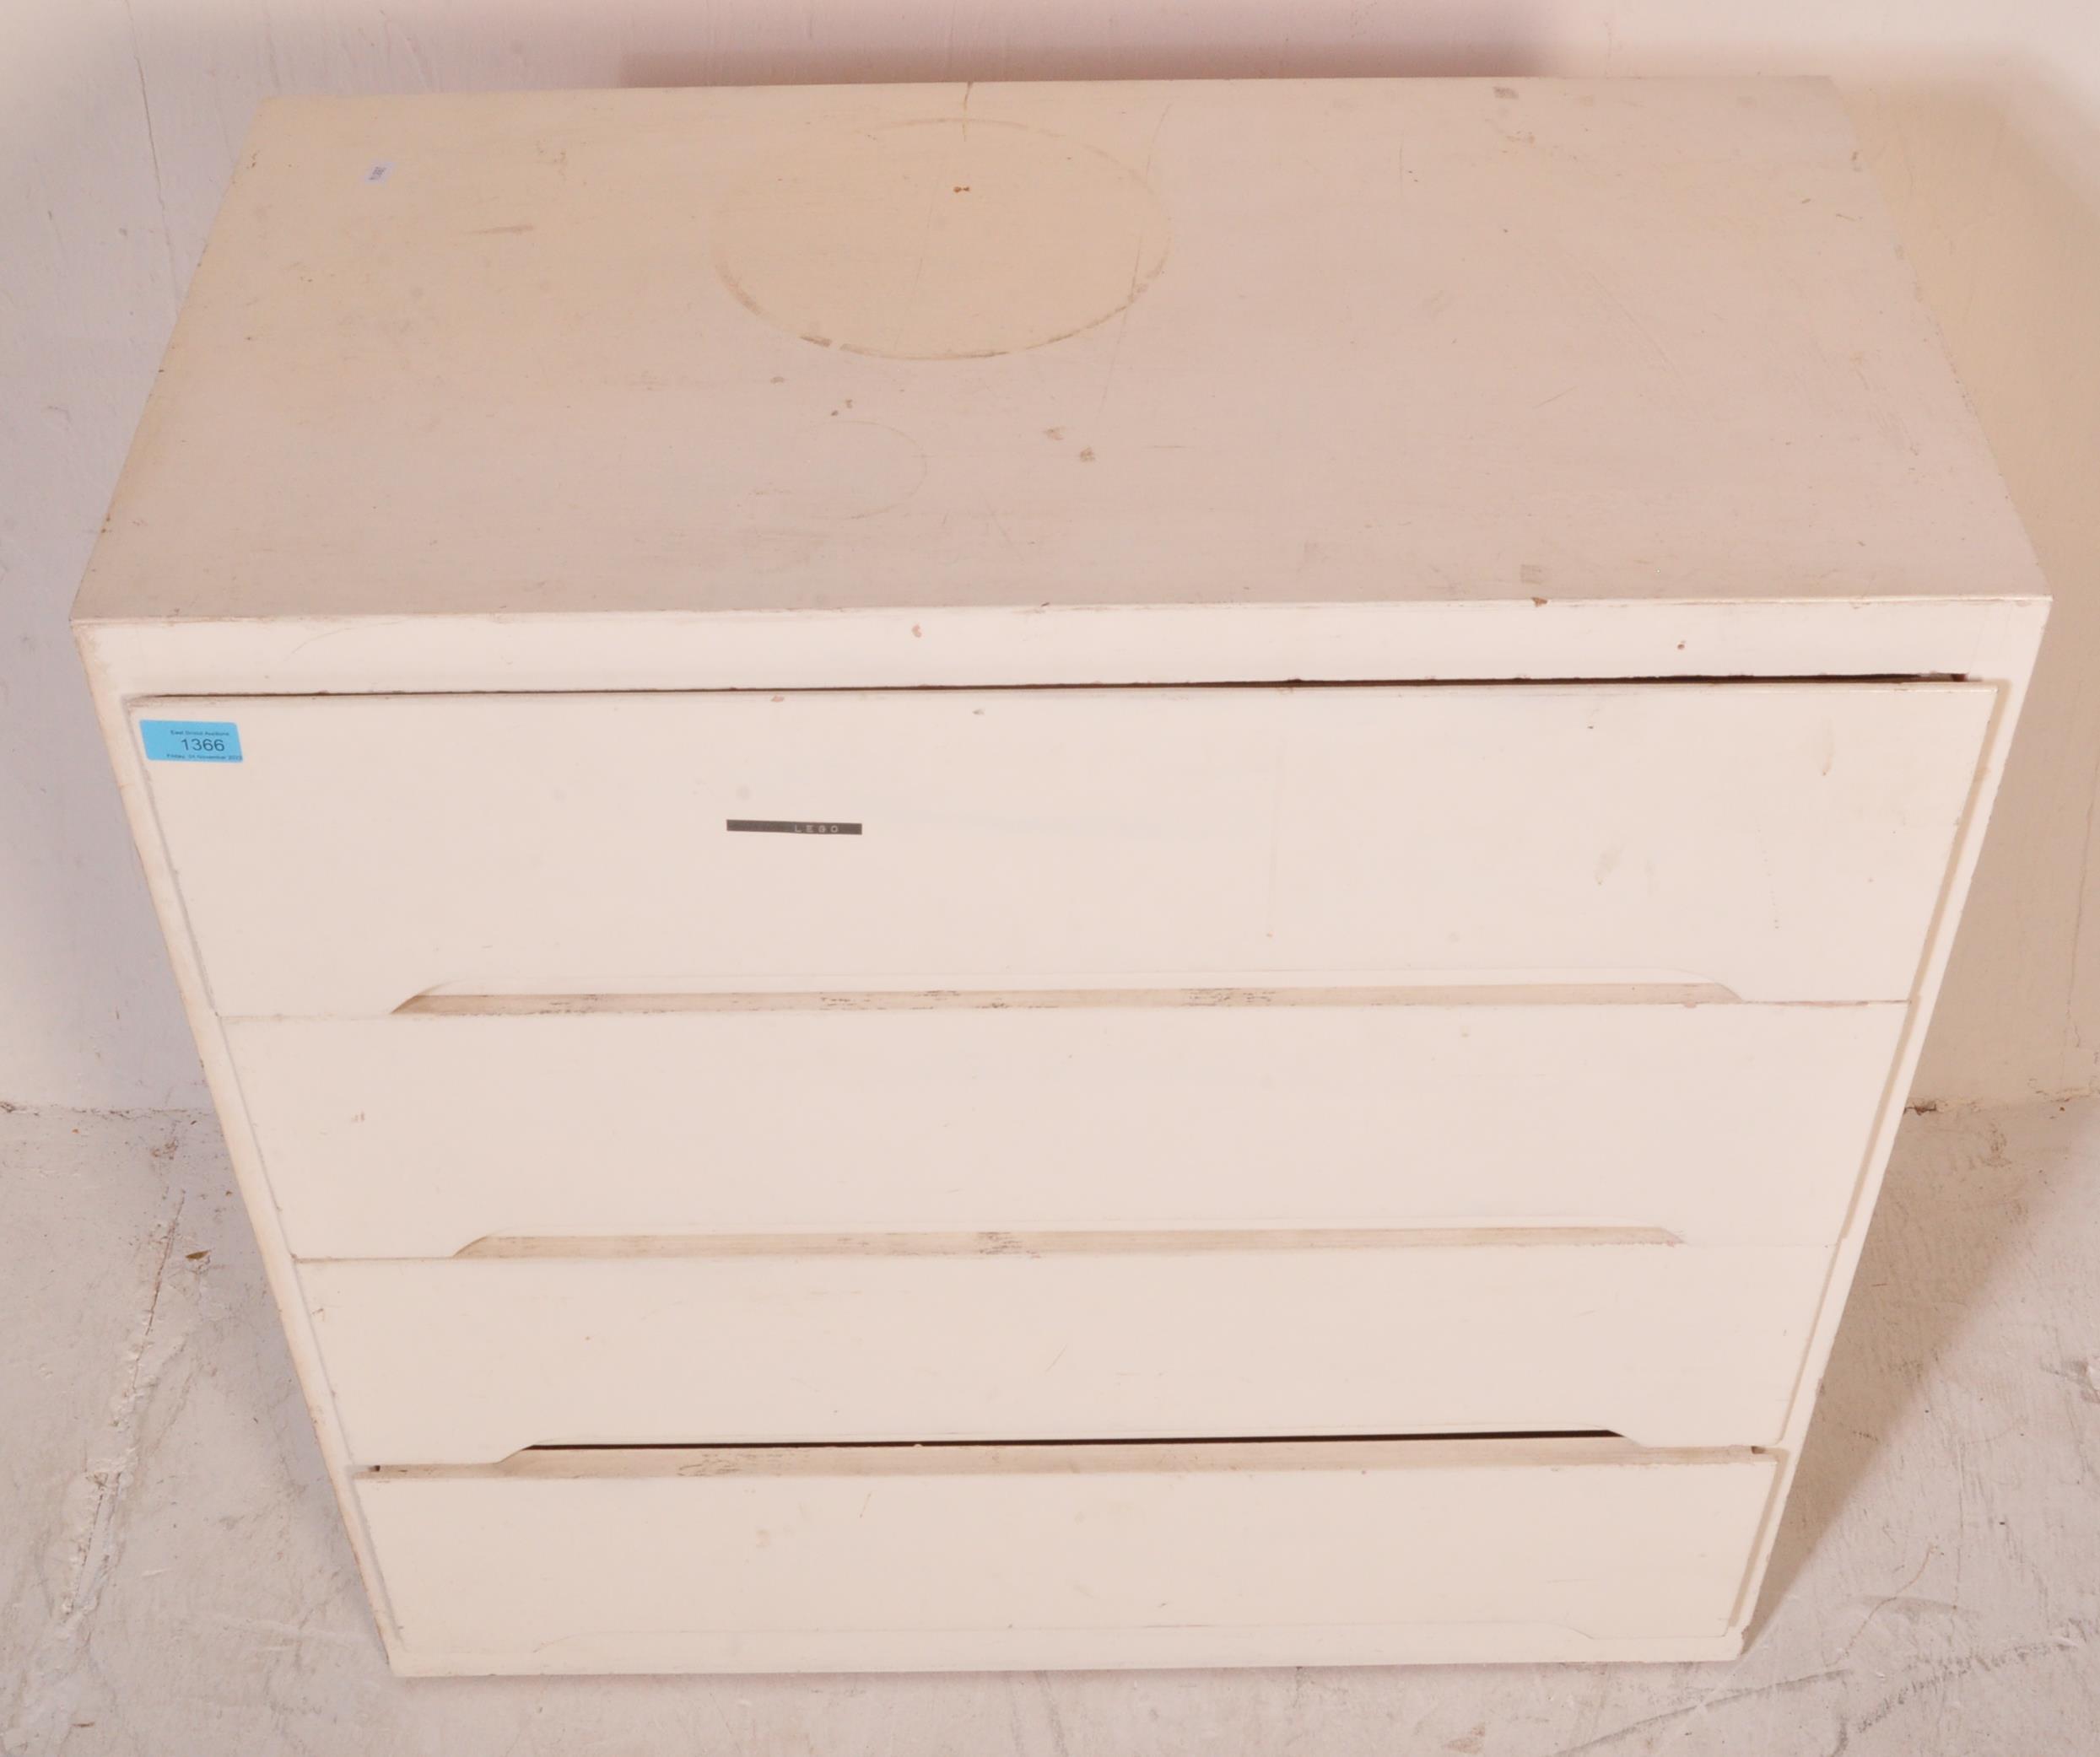 RETRO 20TH CENTURY WHITE CHEST OF DRAWERS - Image 3 of 5